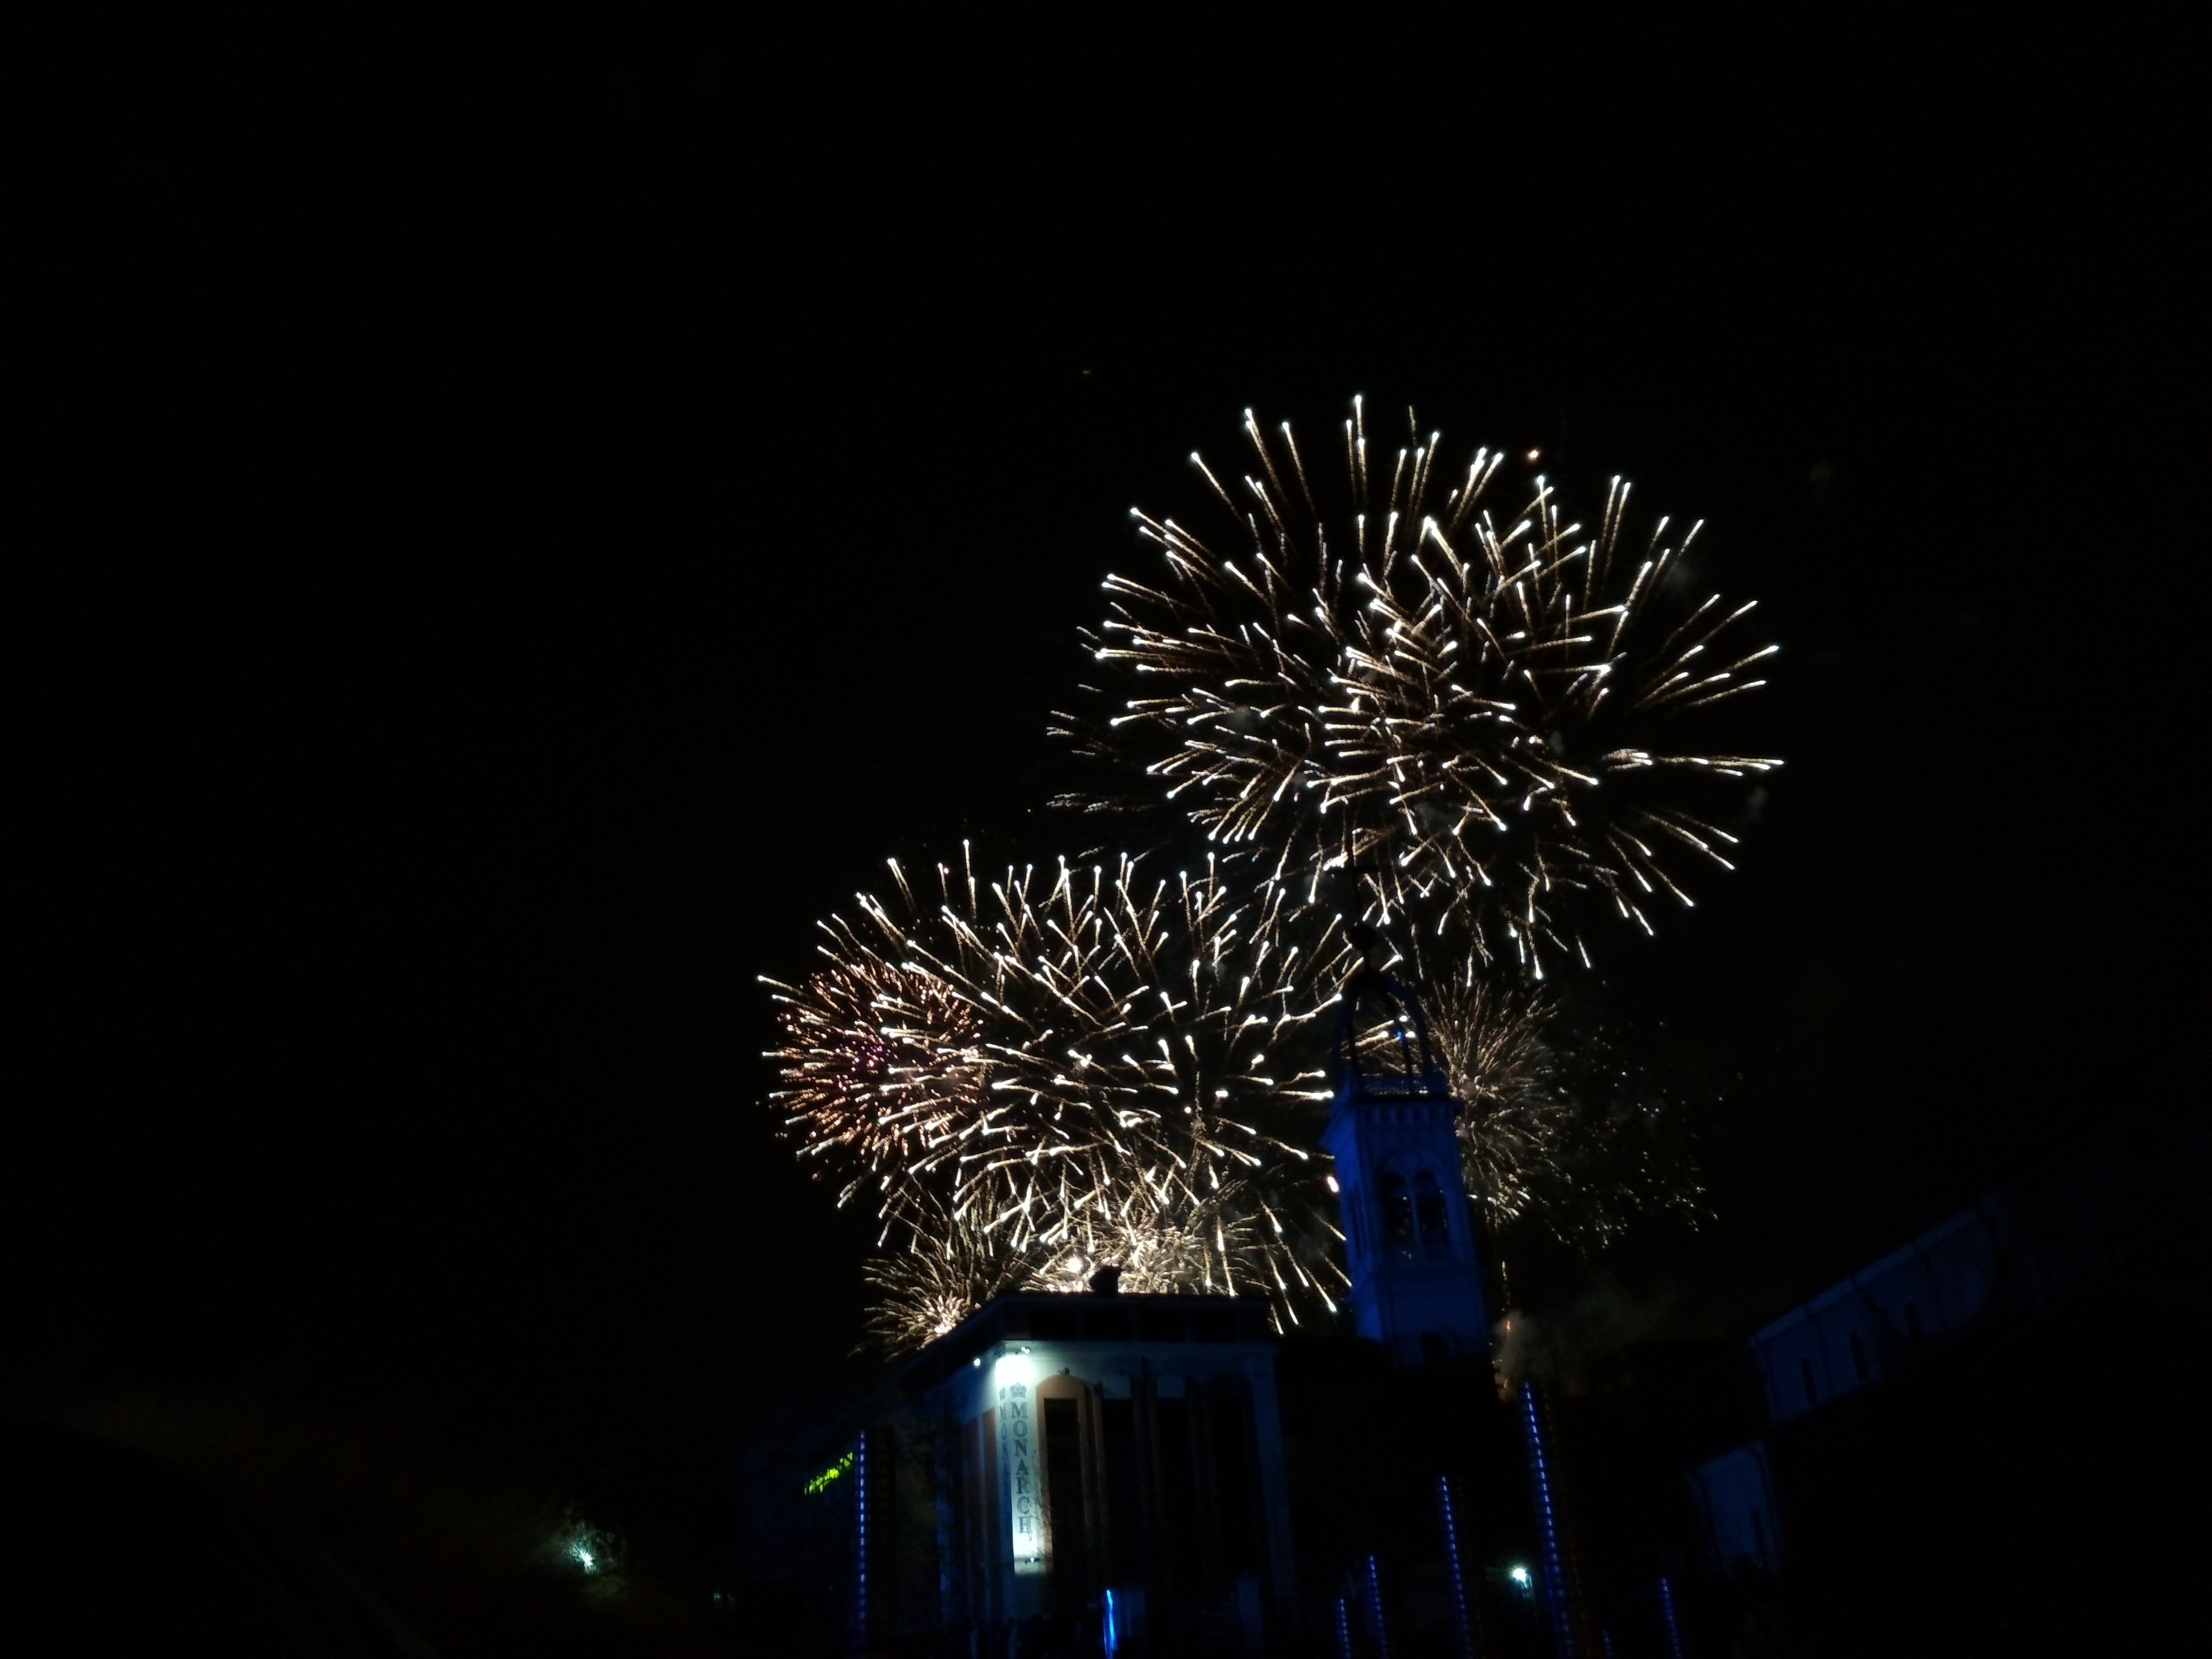 Caption: A night photo of fireworks over a cathedral in Plovdiv, Bulgaria. (Local Guide @DeniGu)